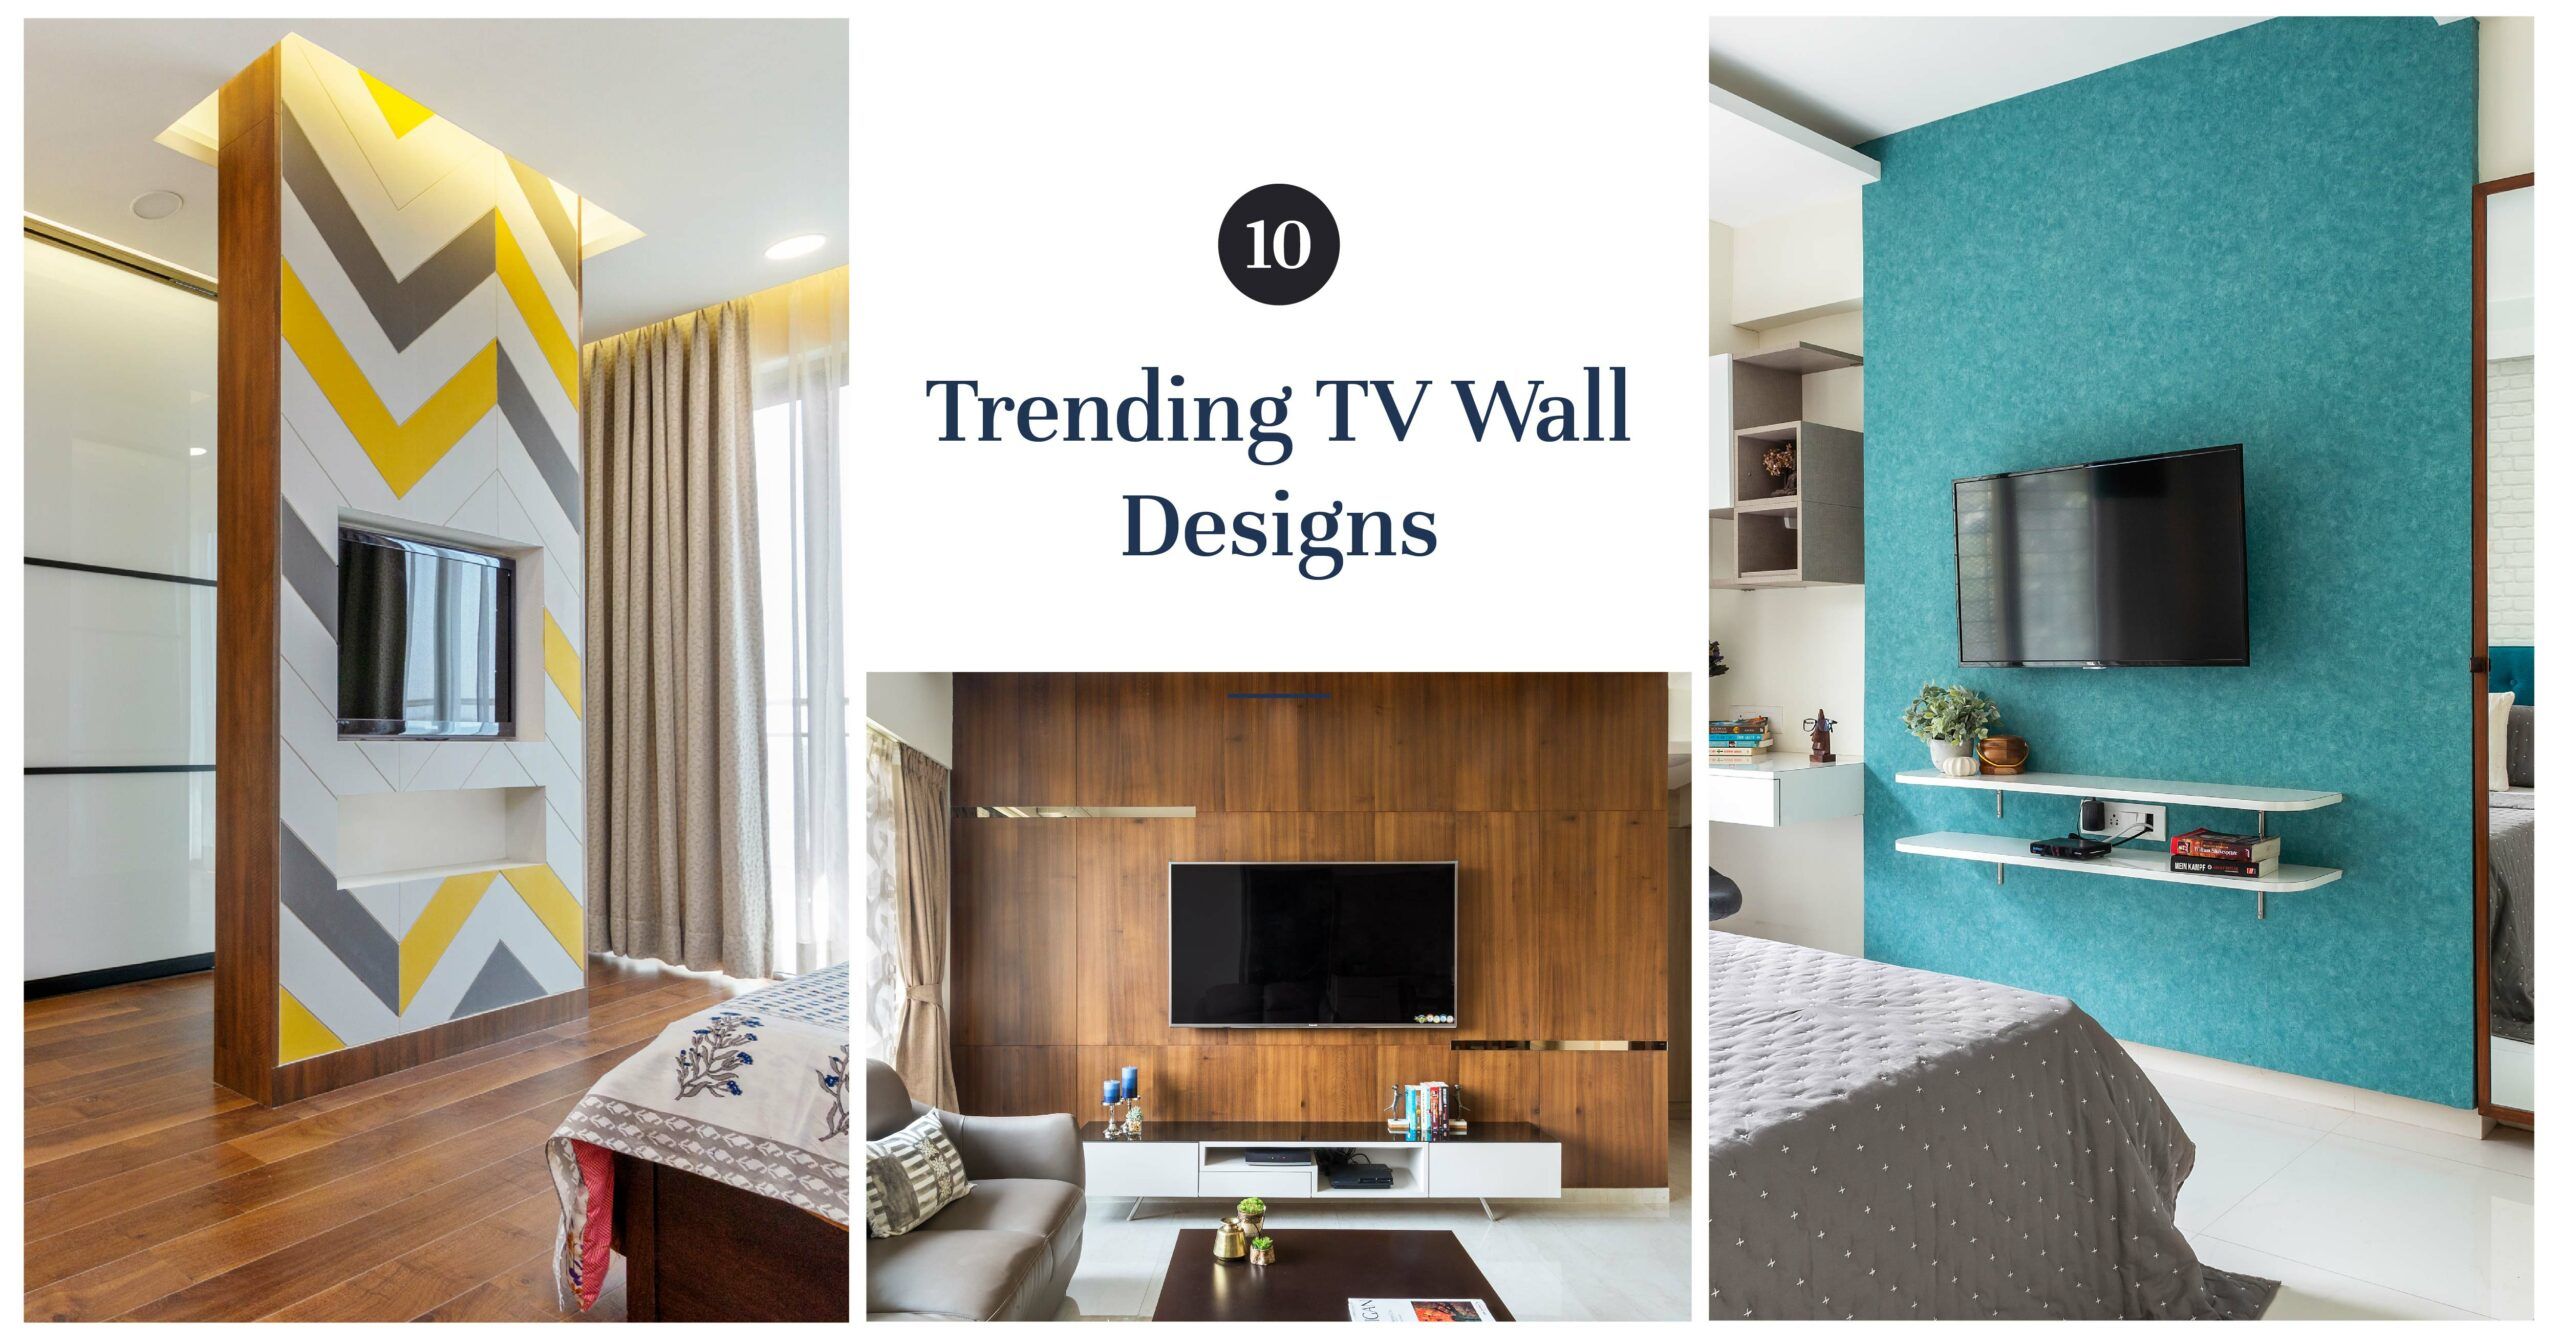 10 Ways To Give Your TV Wall A Striking Upgrade